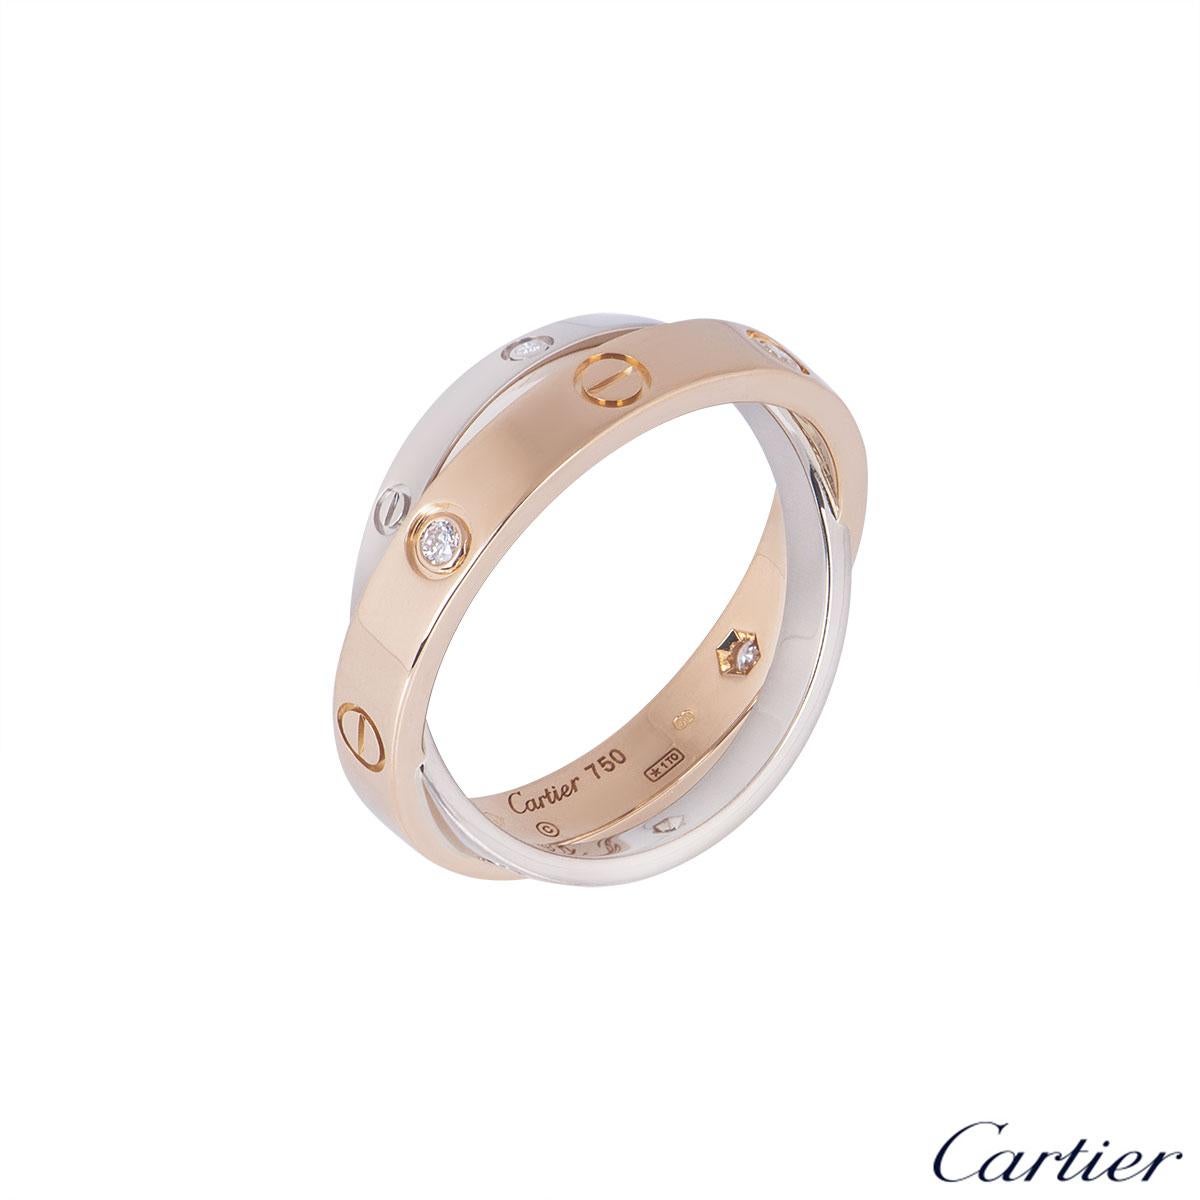 An 18k bi-colour gold double ring by Cartier from the Love collection. The white and rose gold ring is set with the iconic screw motif, alternating with diamonds. The 6 round brilliant cut diamonds have a weight of 0.07ct. The ring is a size UK N,